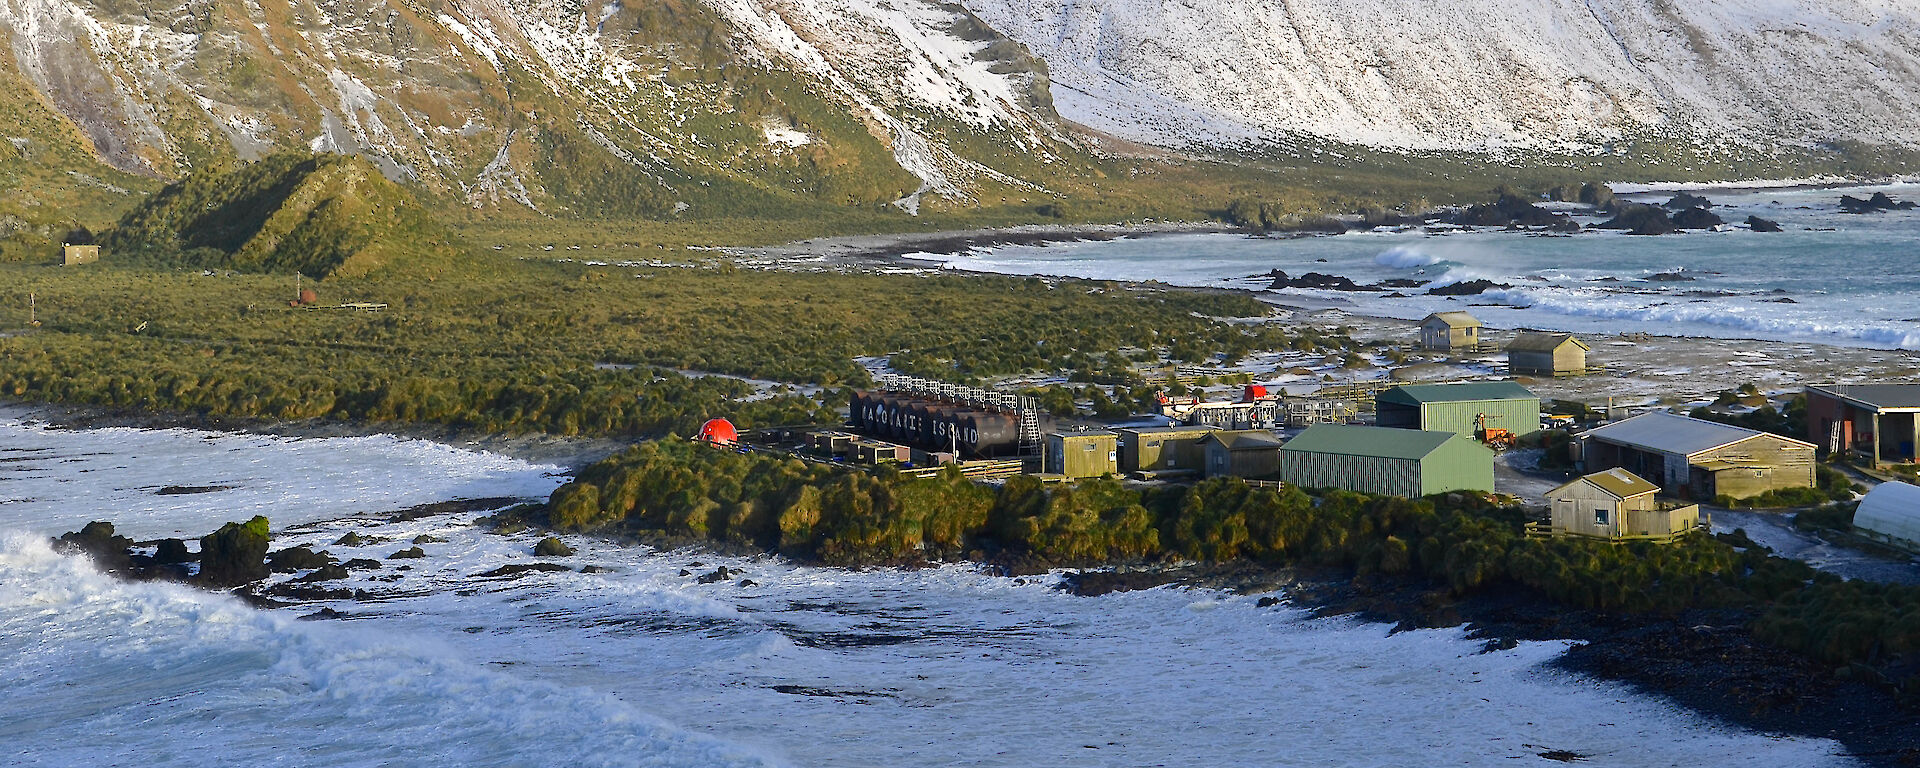 Buildings and snow on Macquarie Island